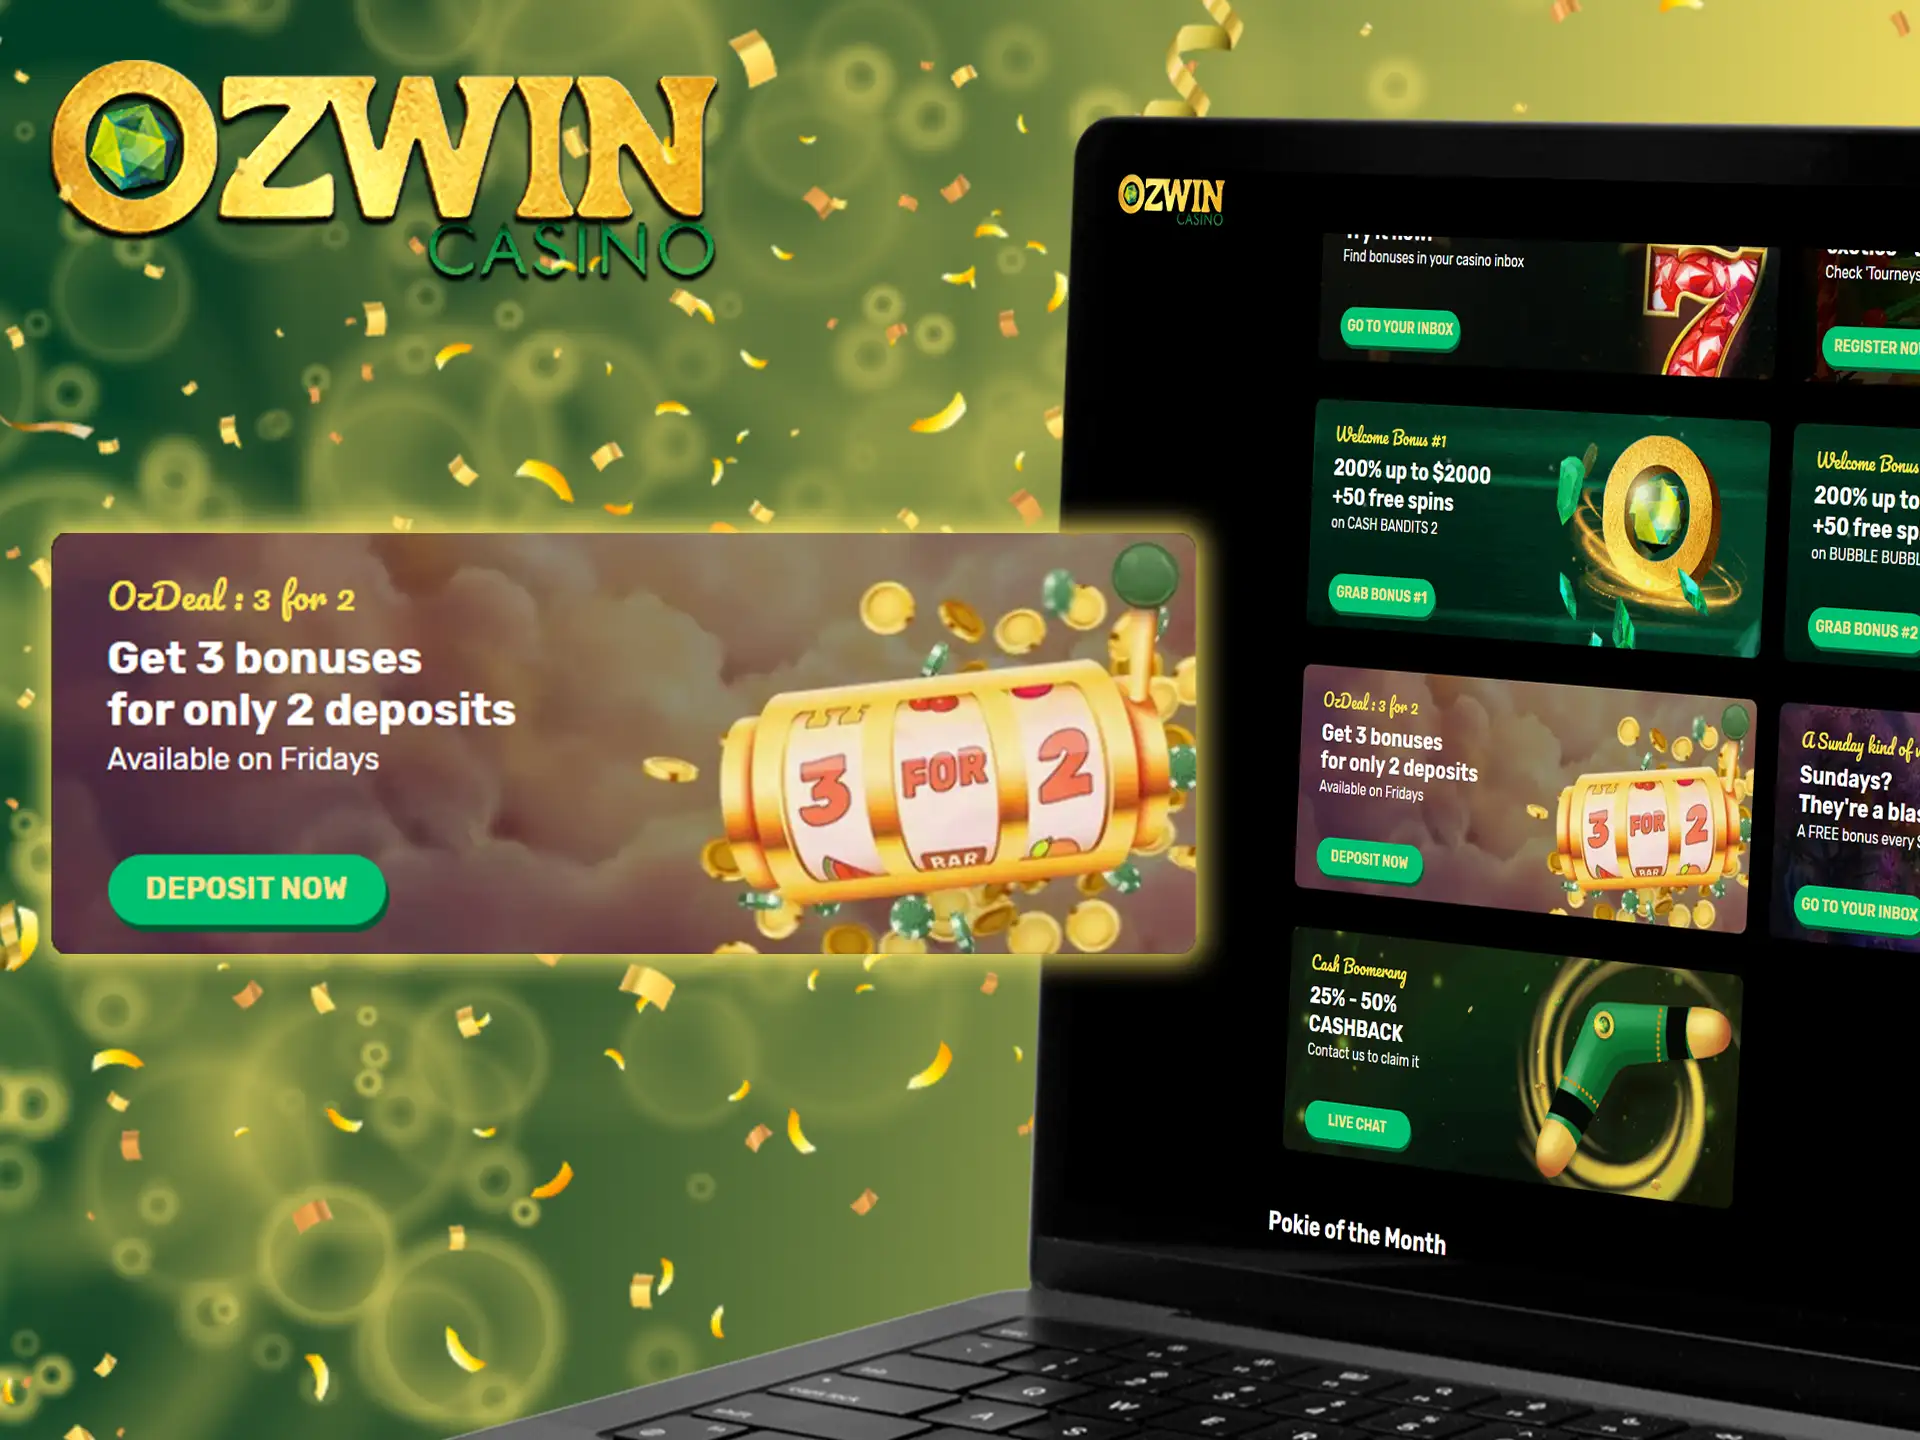 To enhance your gaming experience, Ozwin Casino is offering 2 no deposit bonuses and freebie prizes on Fridays.